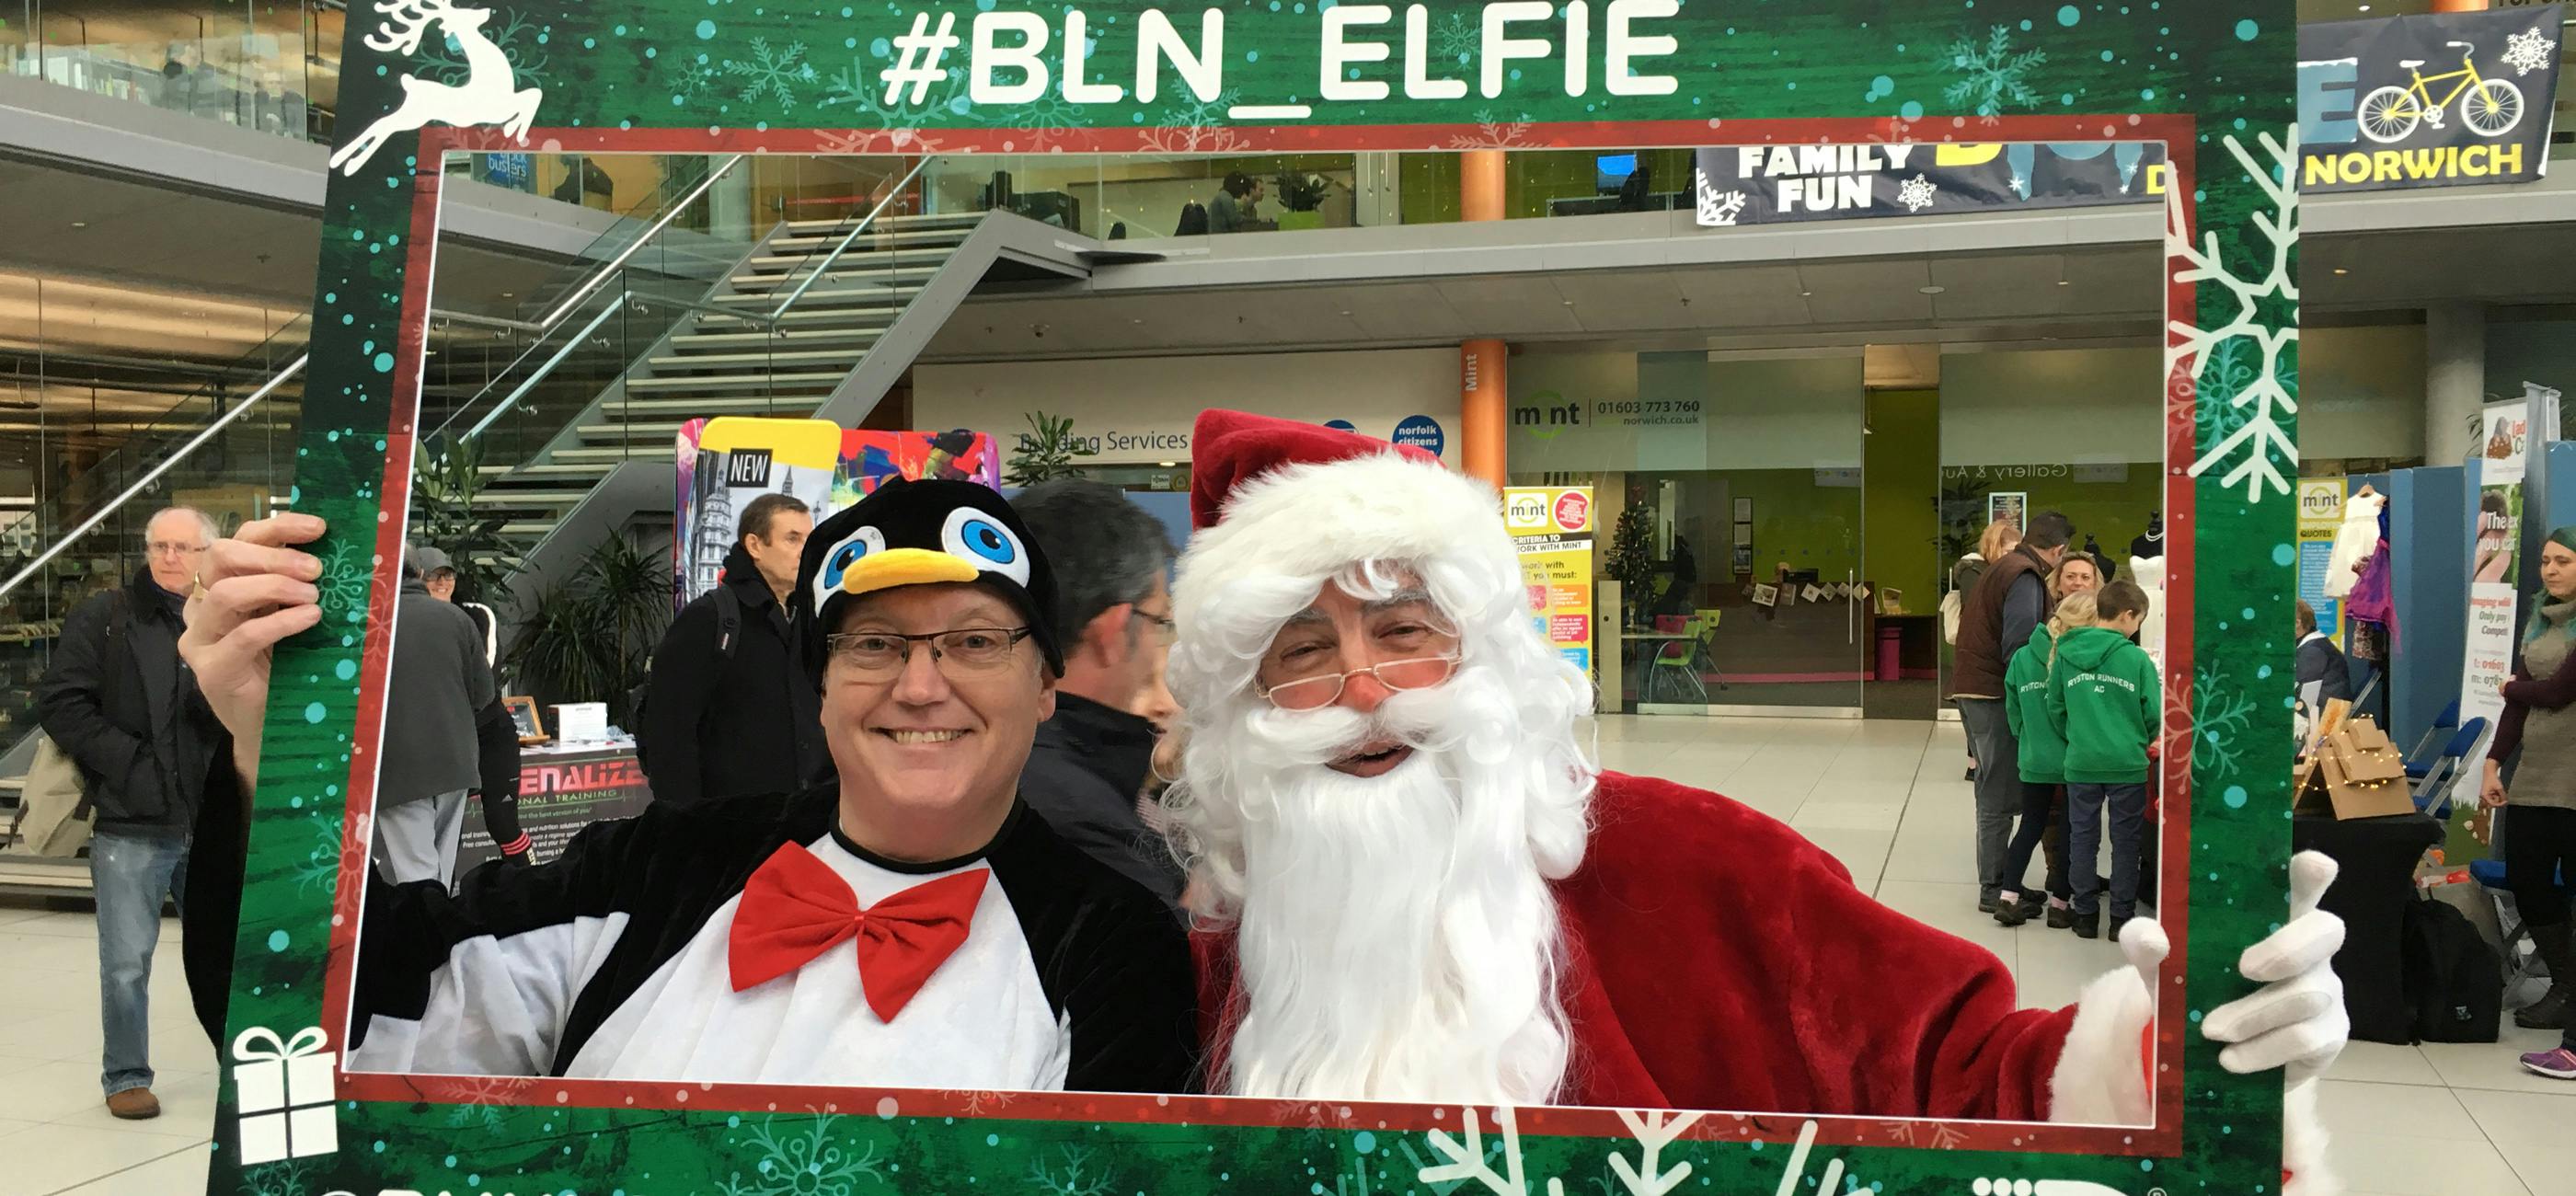 Two people take a selfie in a festive photo frame, one is dressed as a penguin, one as Father Christmas